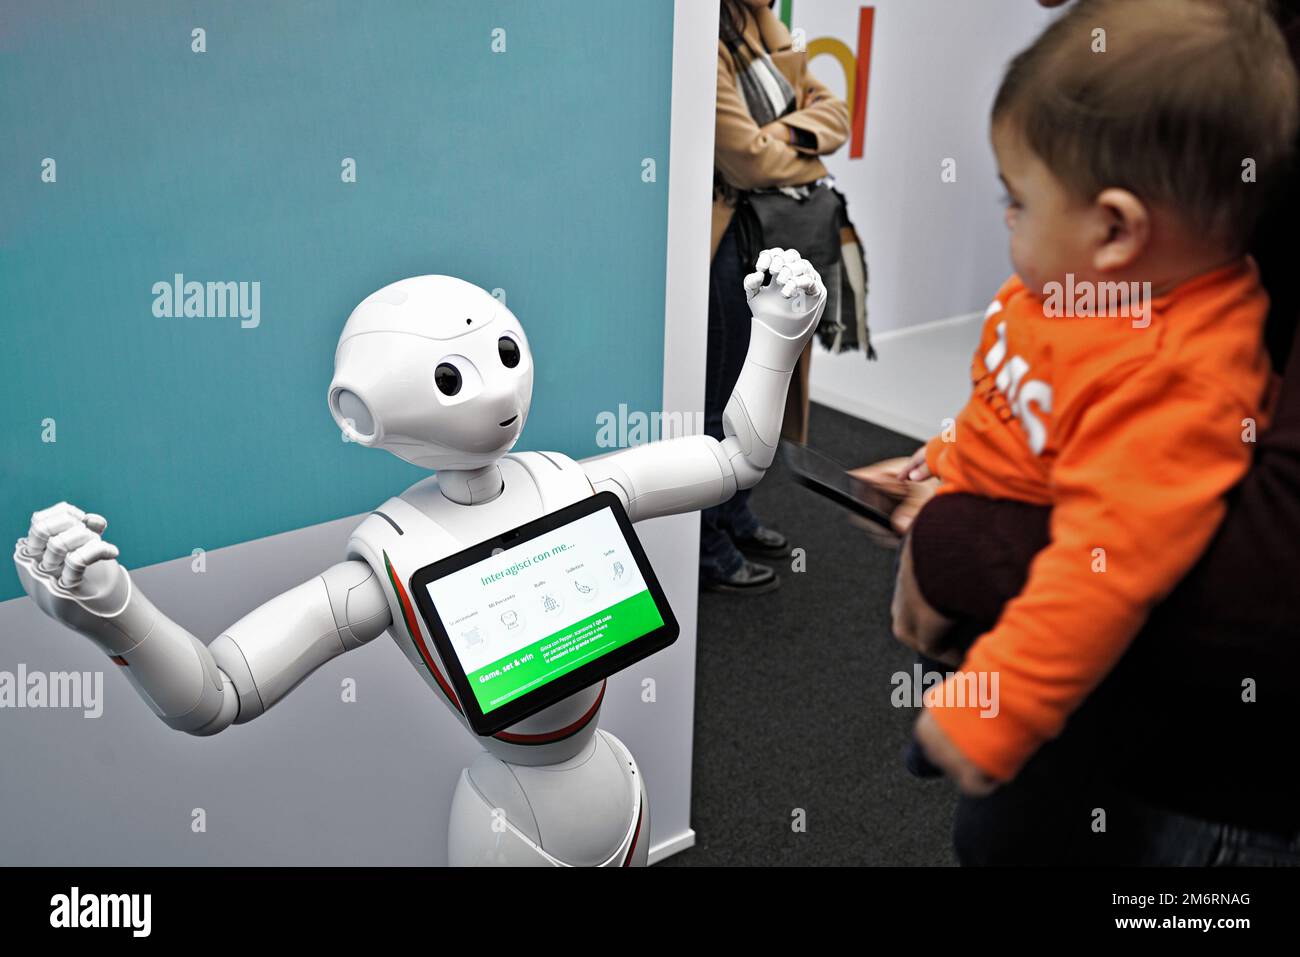 'Pepper' robot assistant with information screen in duty to give information. Turin, Italy - November 2022 Stock Photo